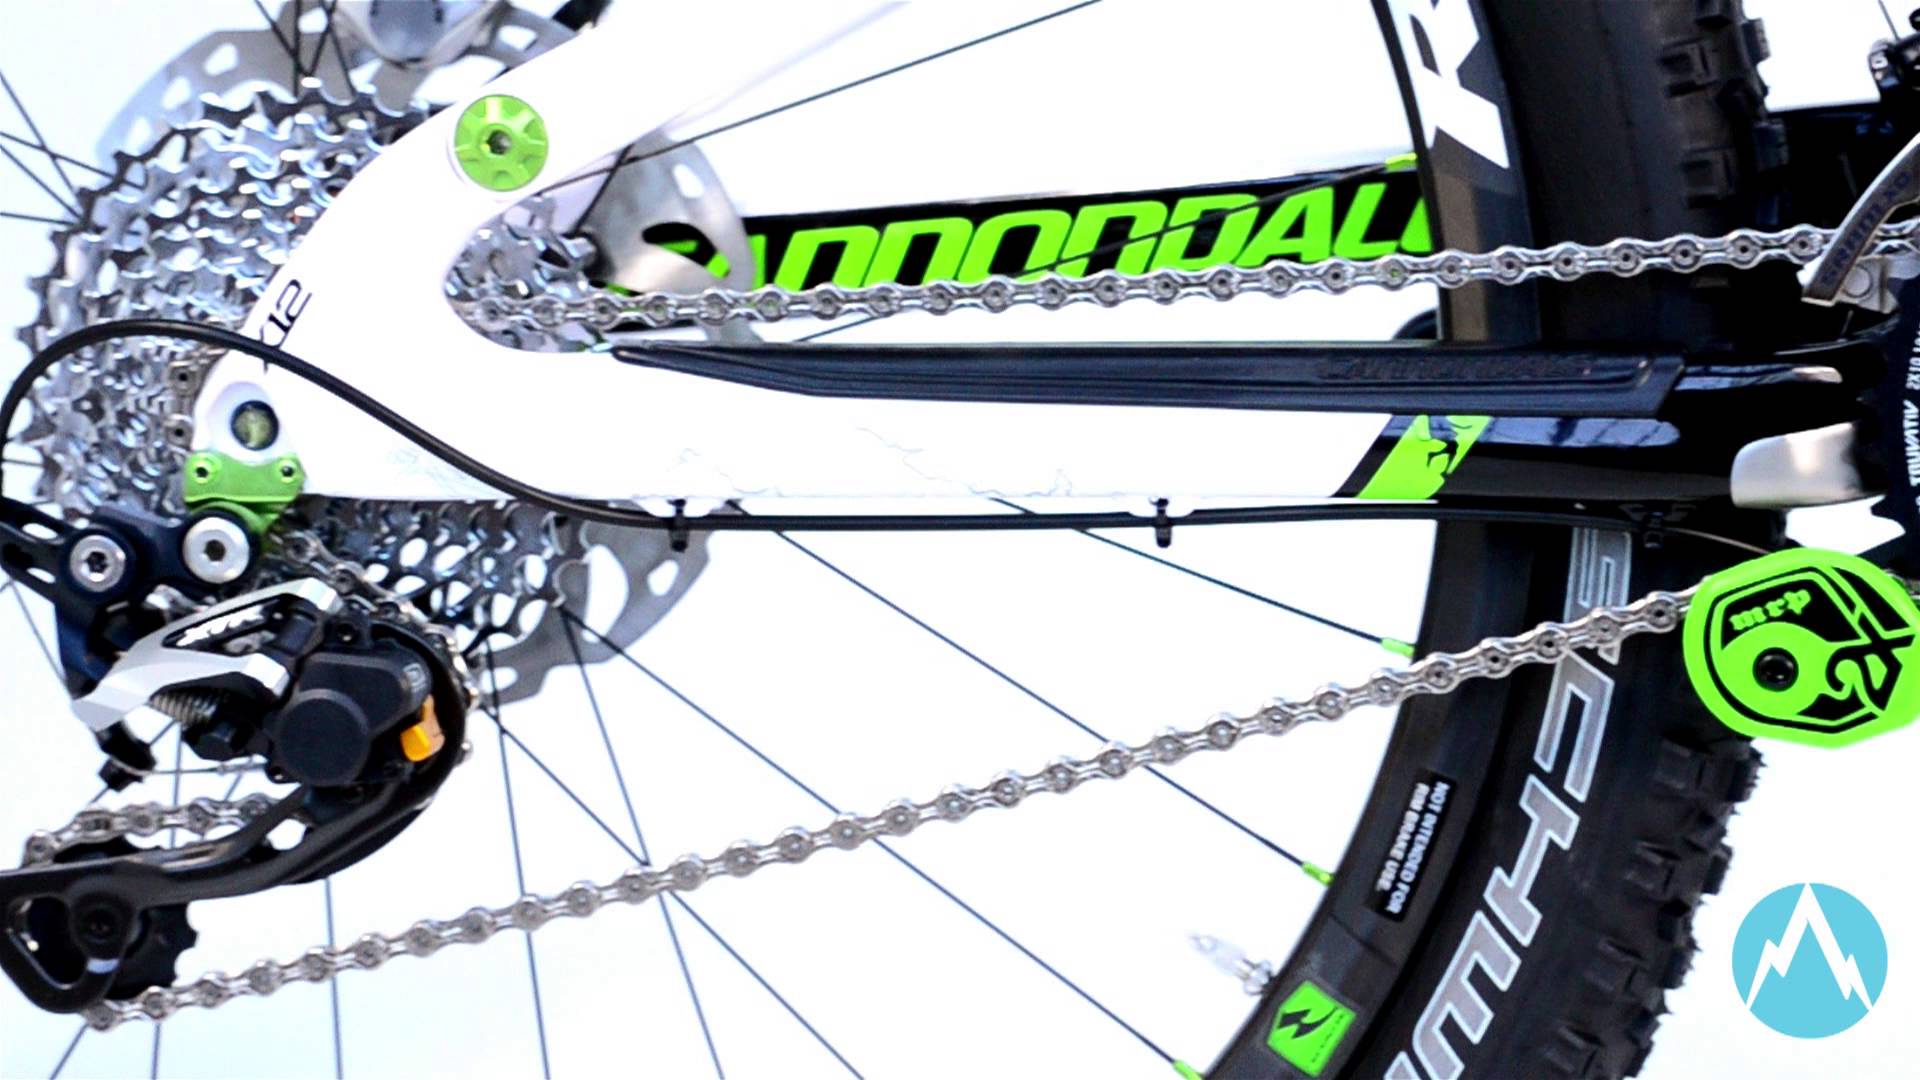 2013 CANNONDALE JEKYLL CARBON 1 VIDEO SPEC - YouTube